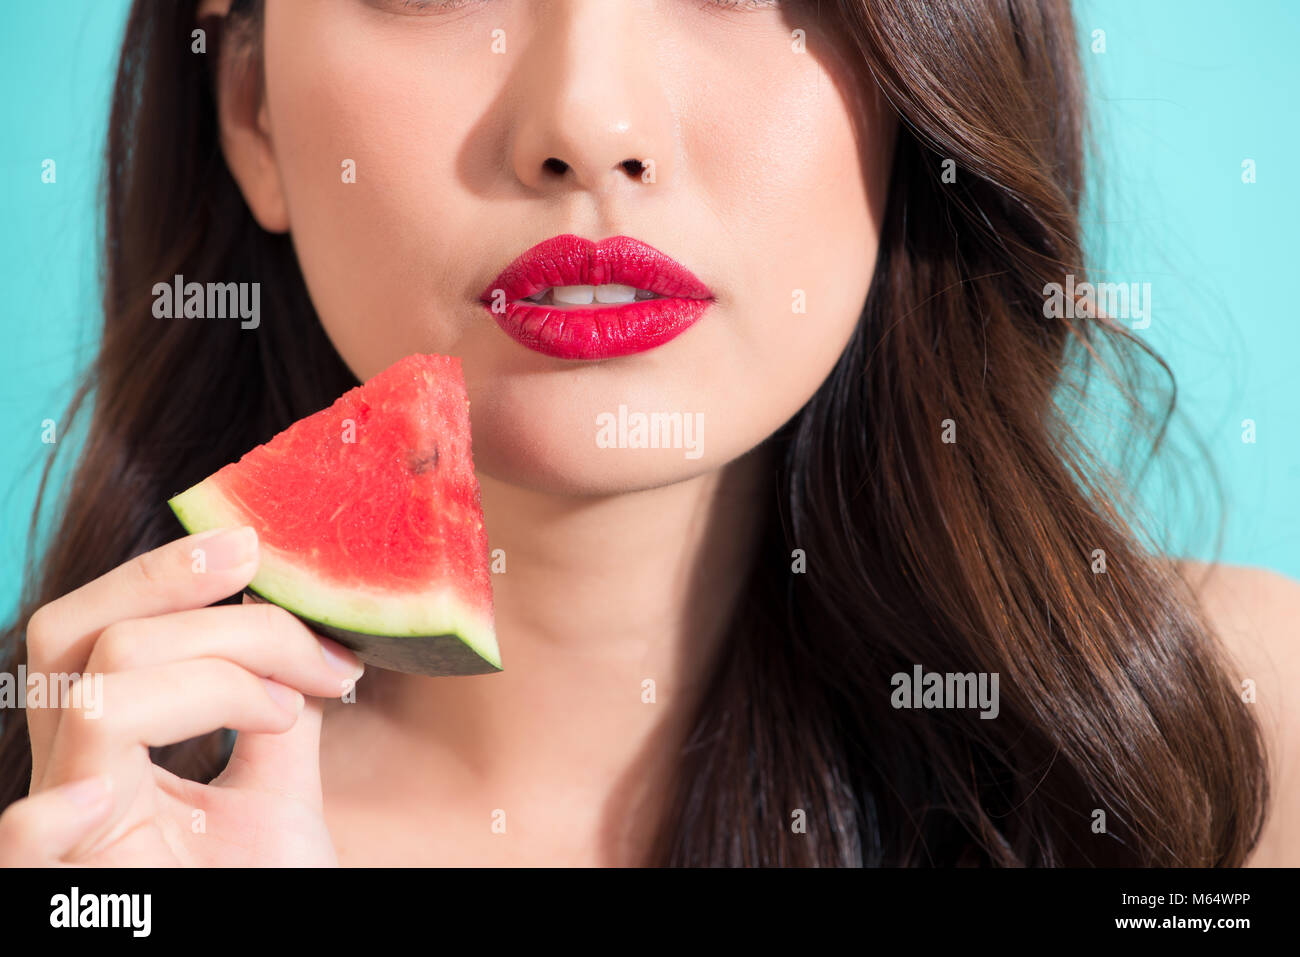 Close-up of a beautiful women holding watermelon slice with red lips. Stock Photo